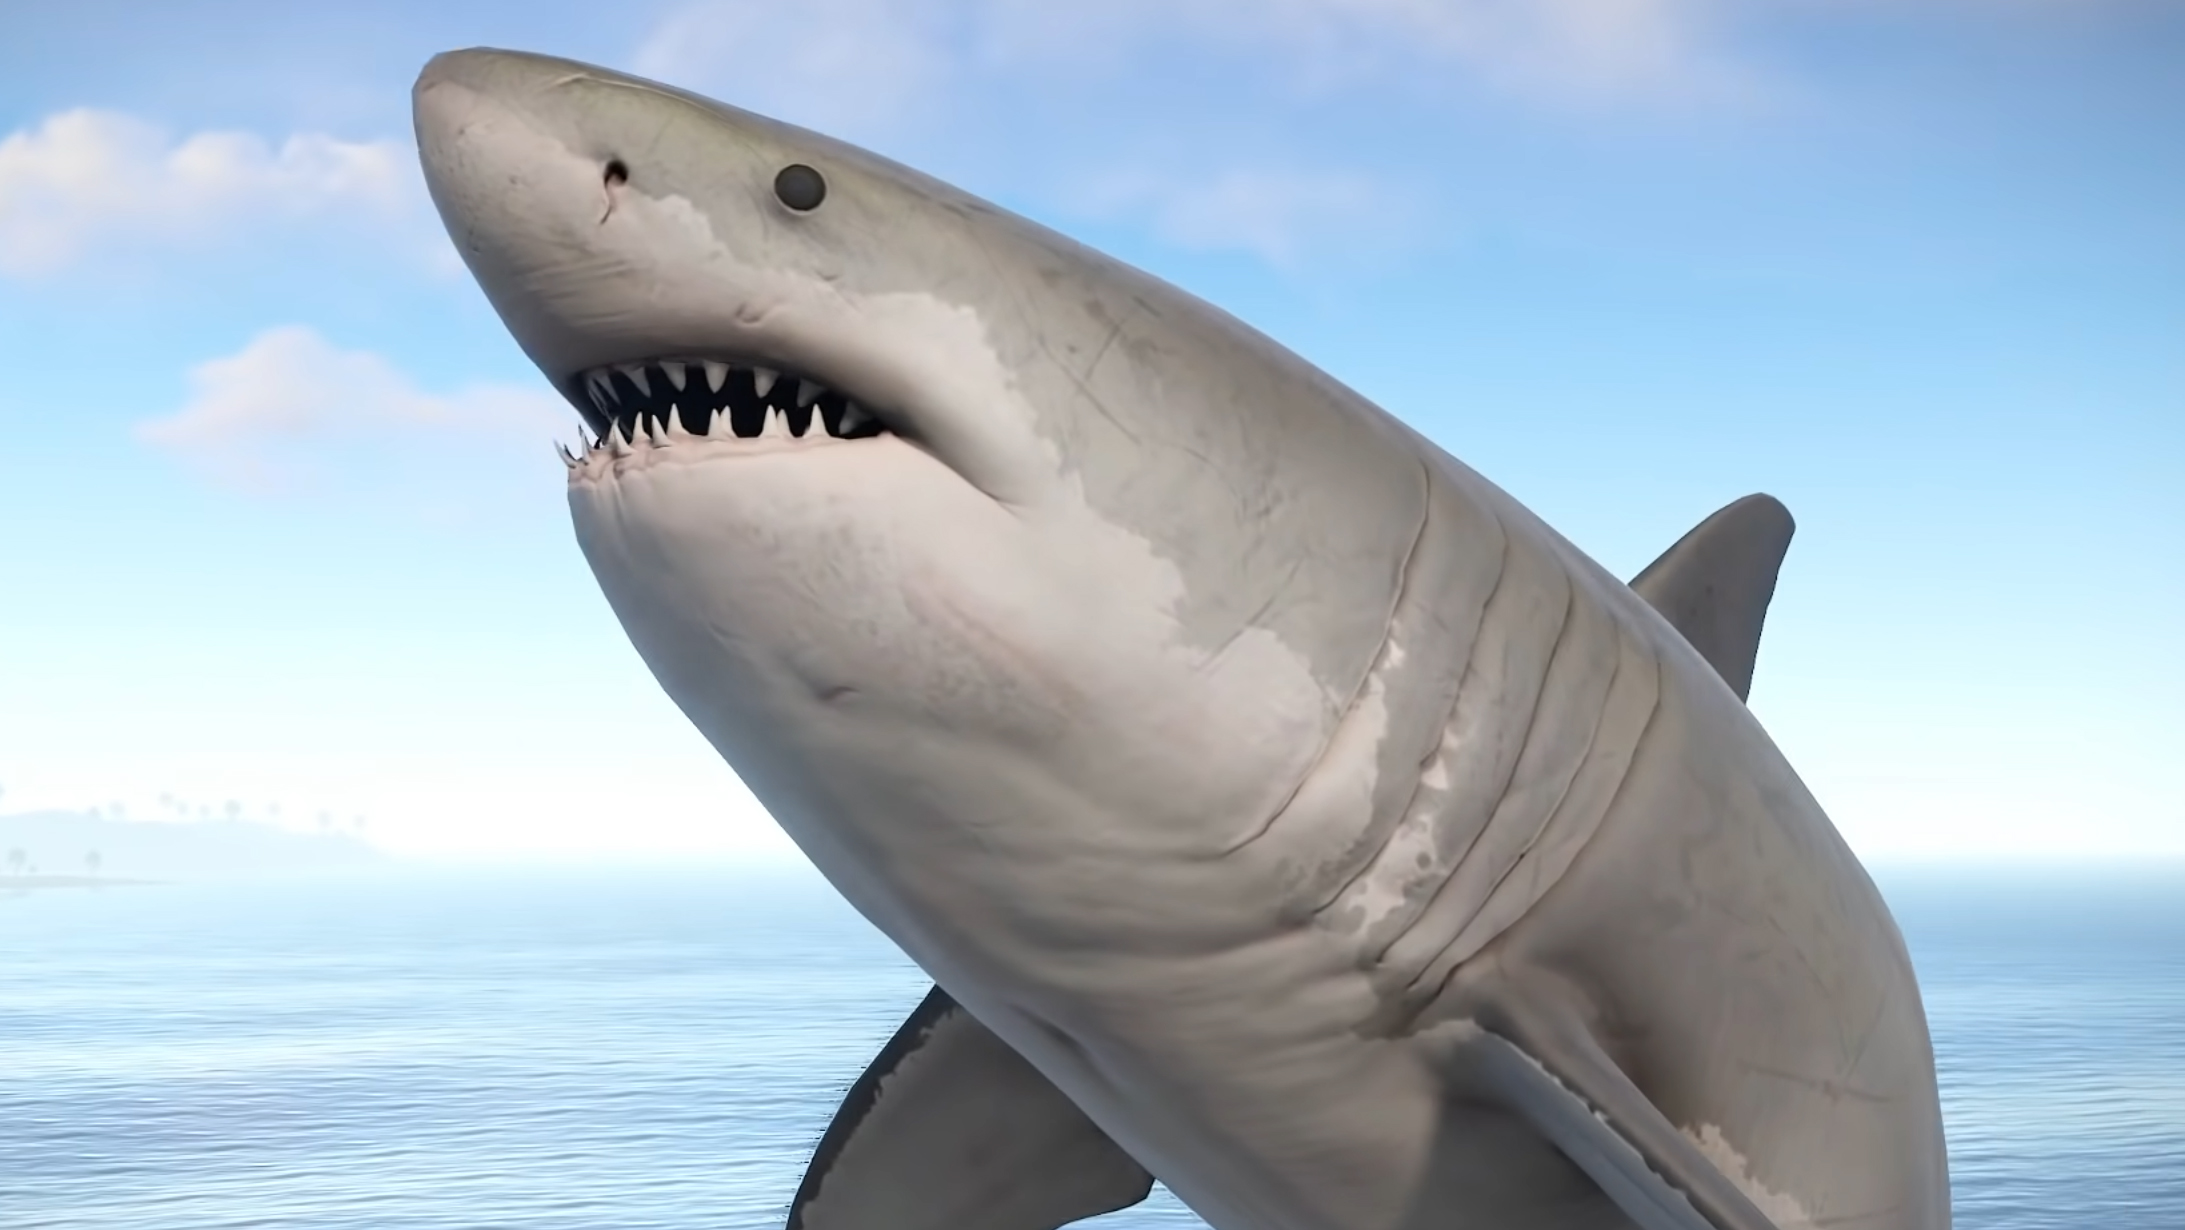  Rust wants you to die underwater more so it's adding sharks 